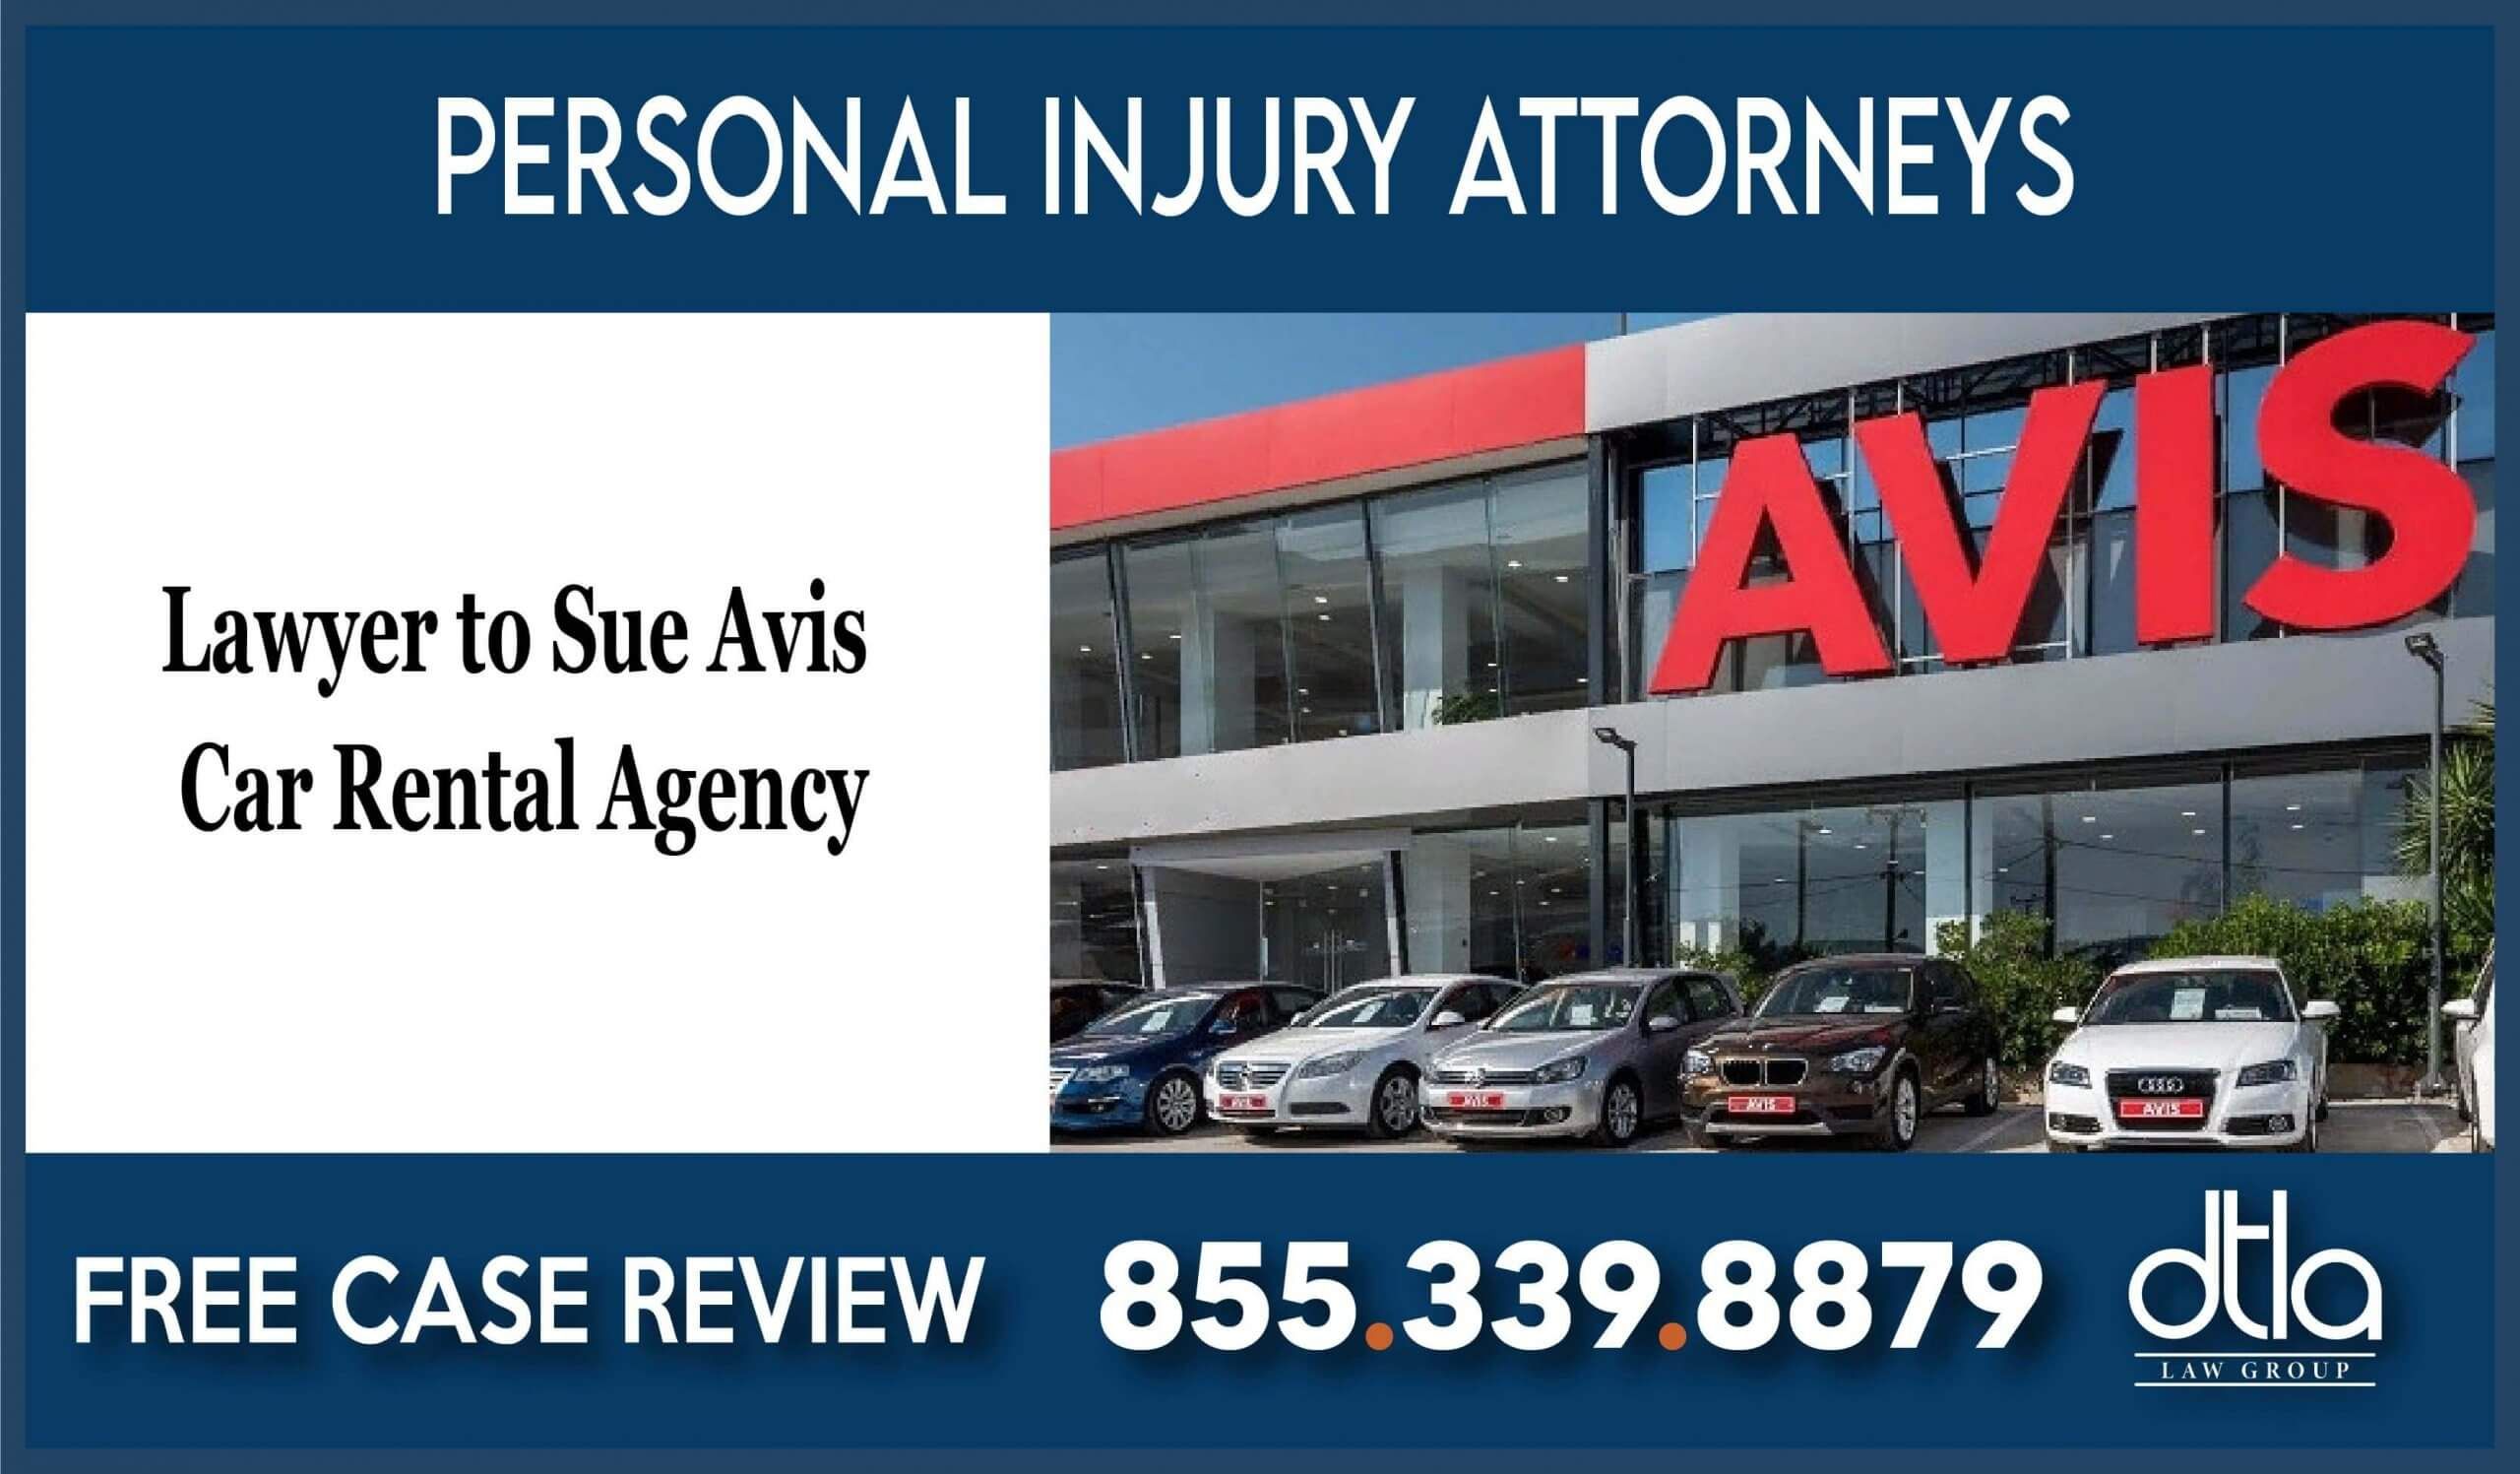 Lawyer to Sue Avis Car Rental Agency attorney sue incident accident compensation insurance